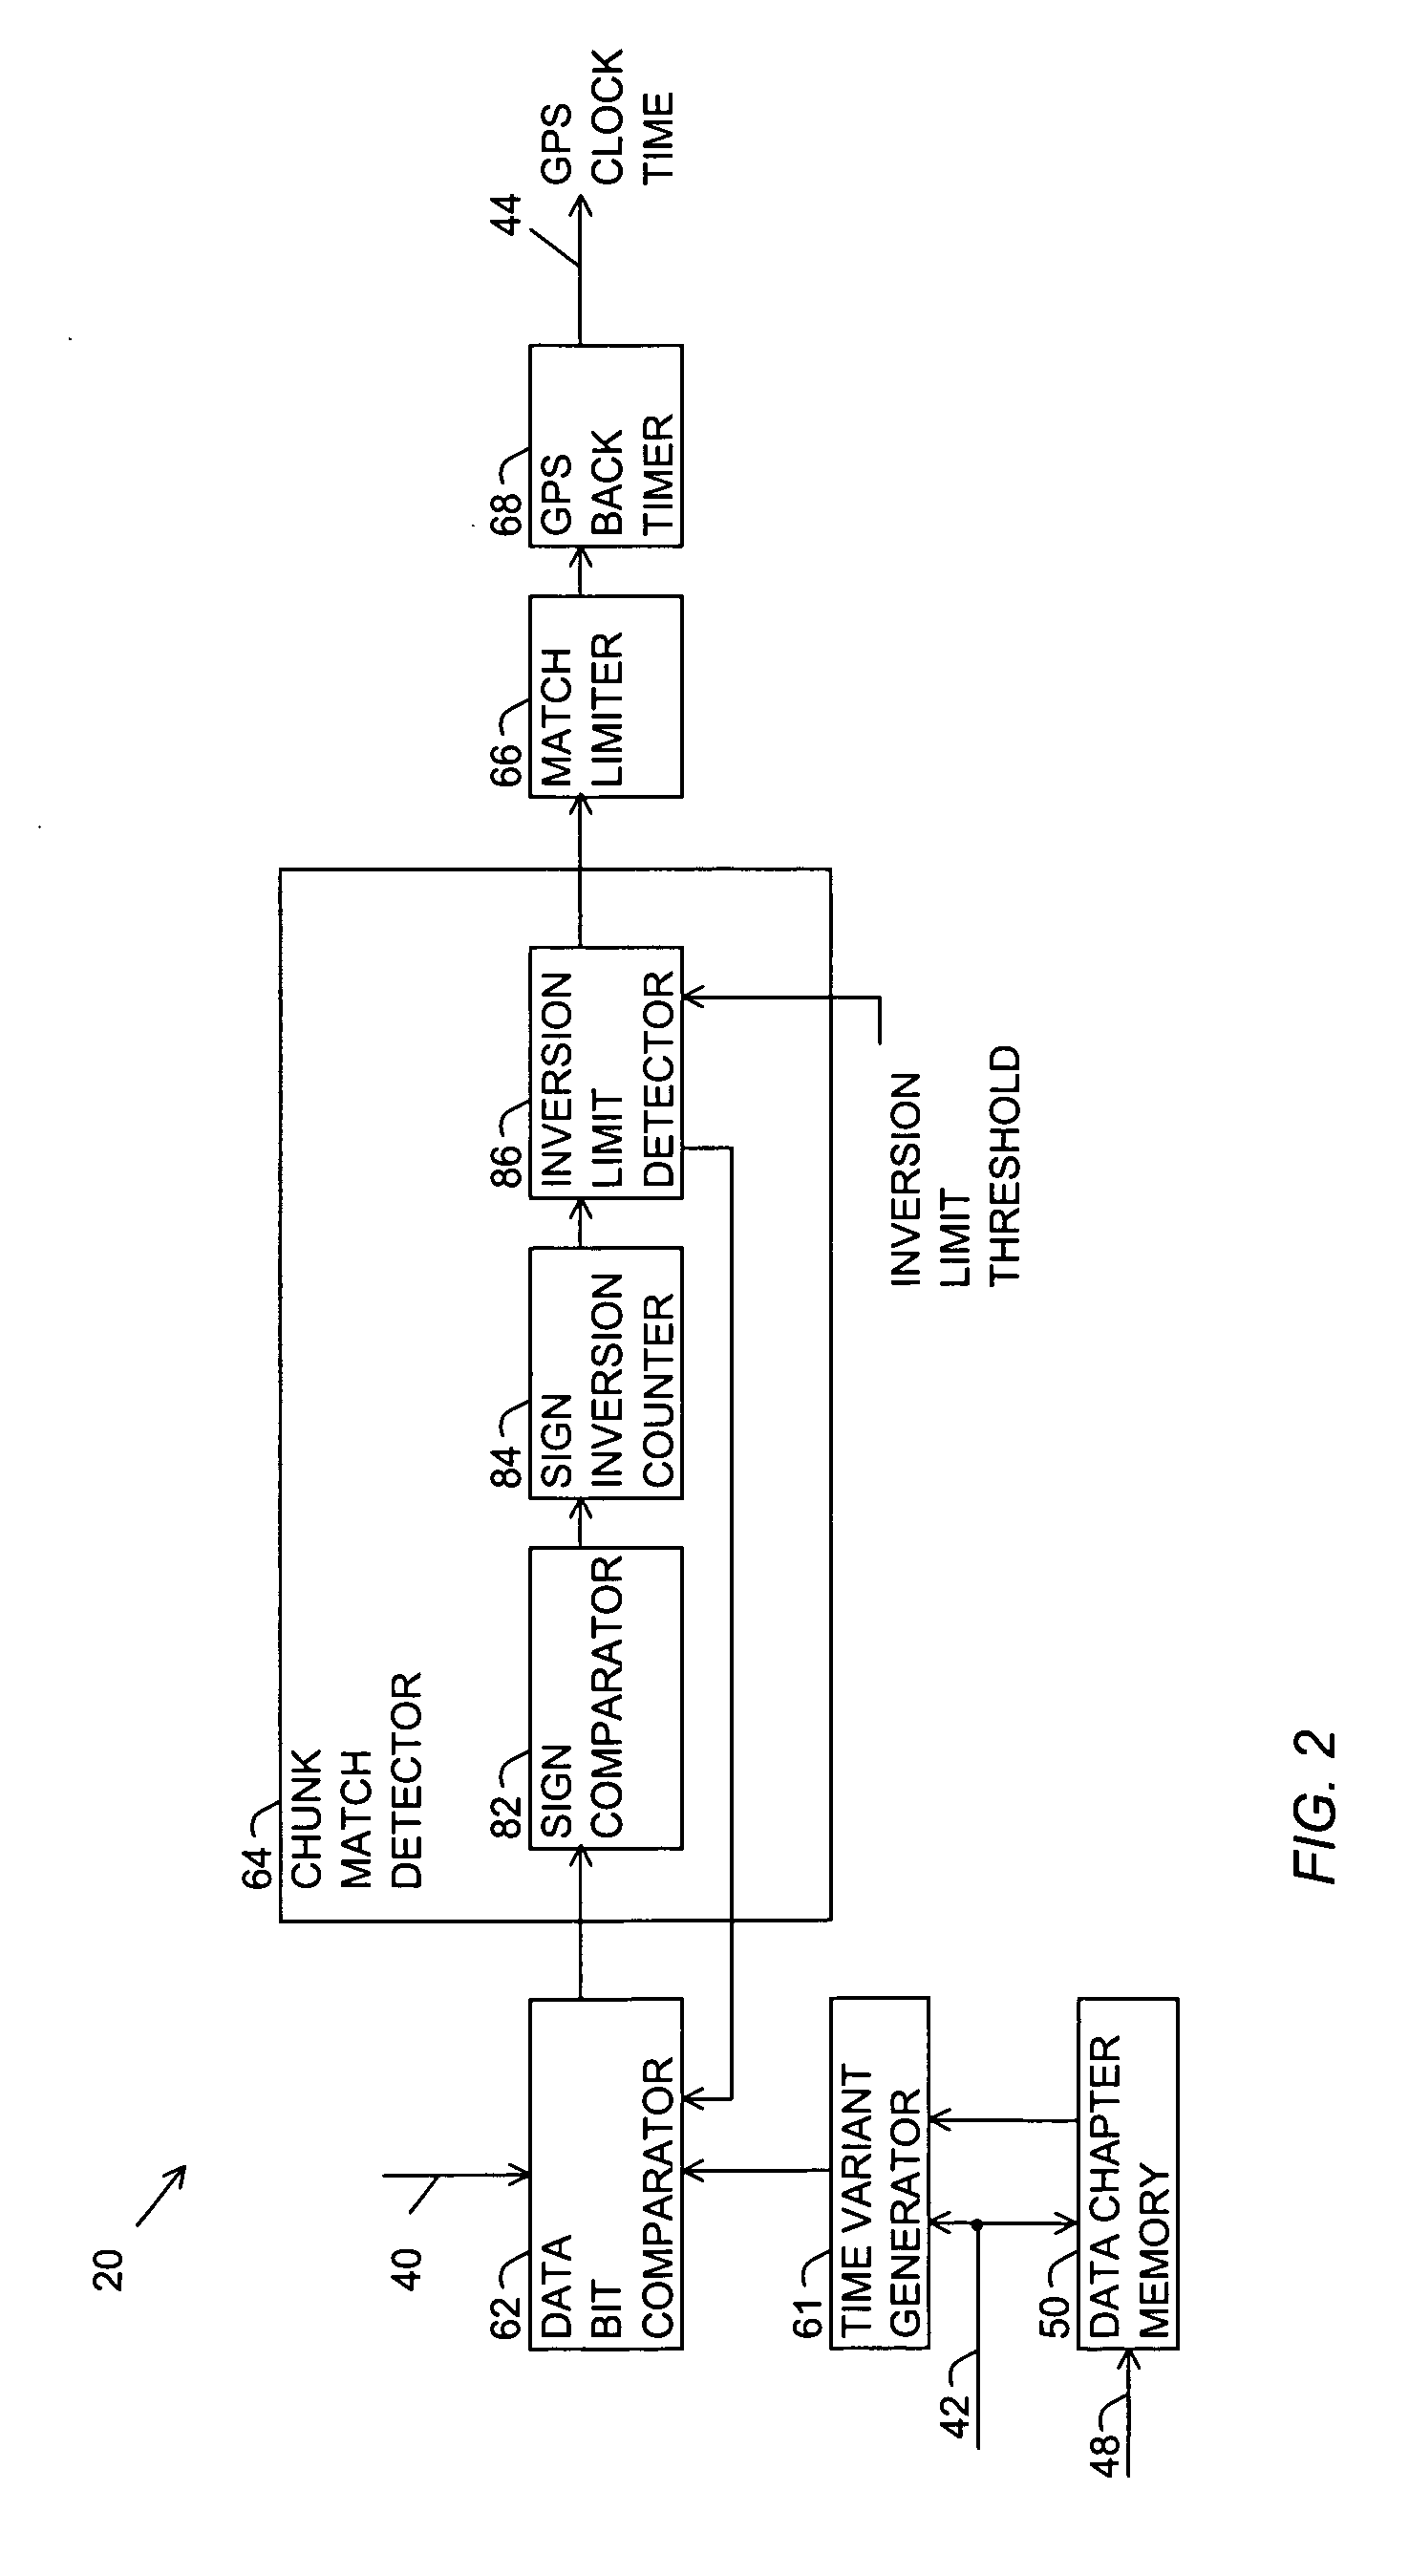 GPS receiver having a prescribed time-of-entry into an operation mode